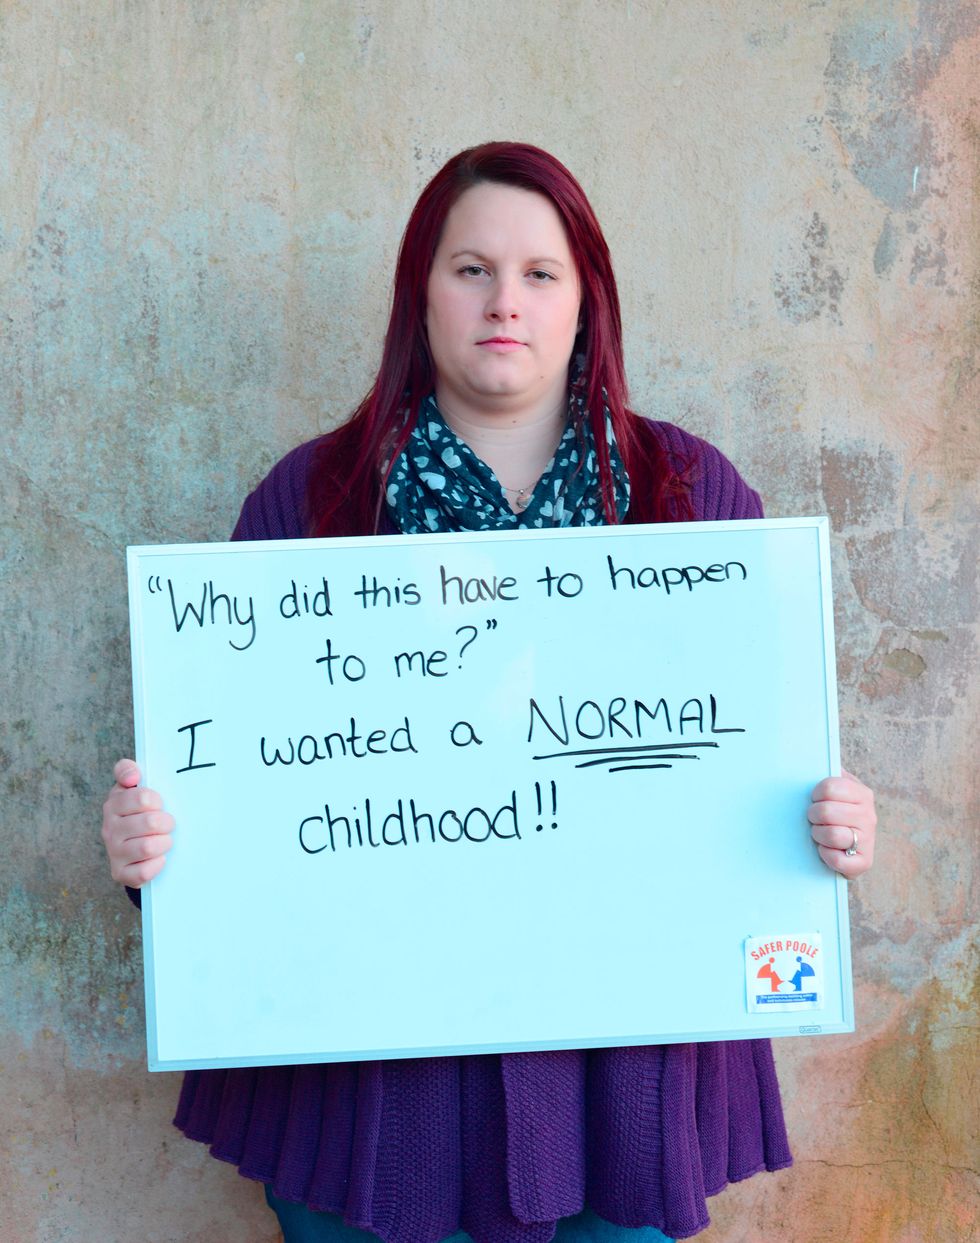 I had my childhood taken away from me by sexual abuse, and I don't want others to feel the same